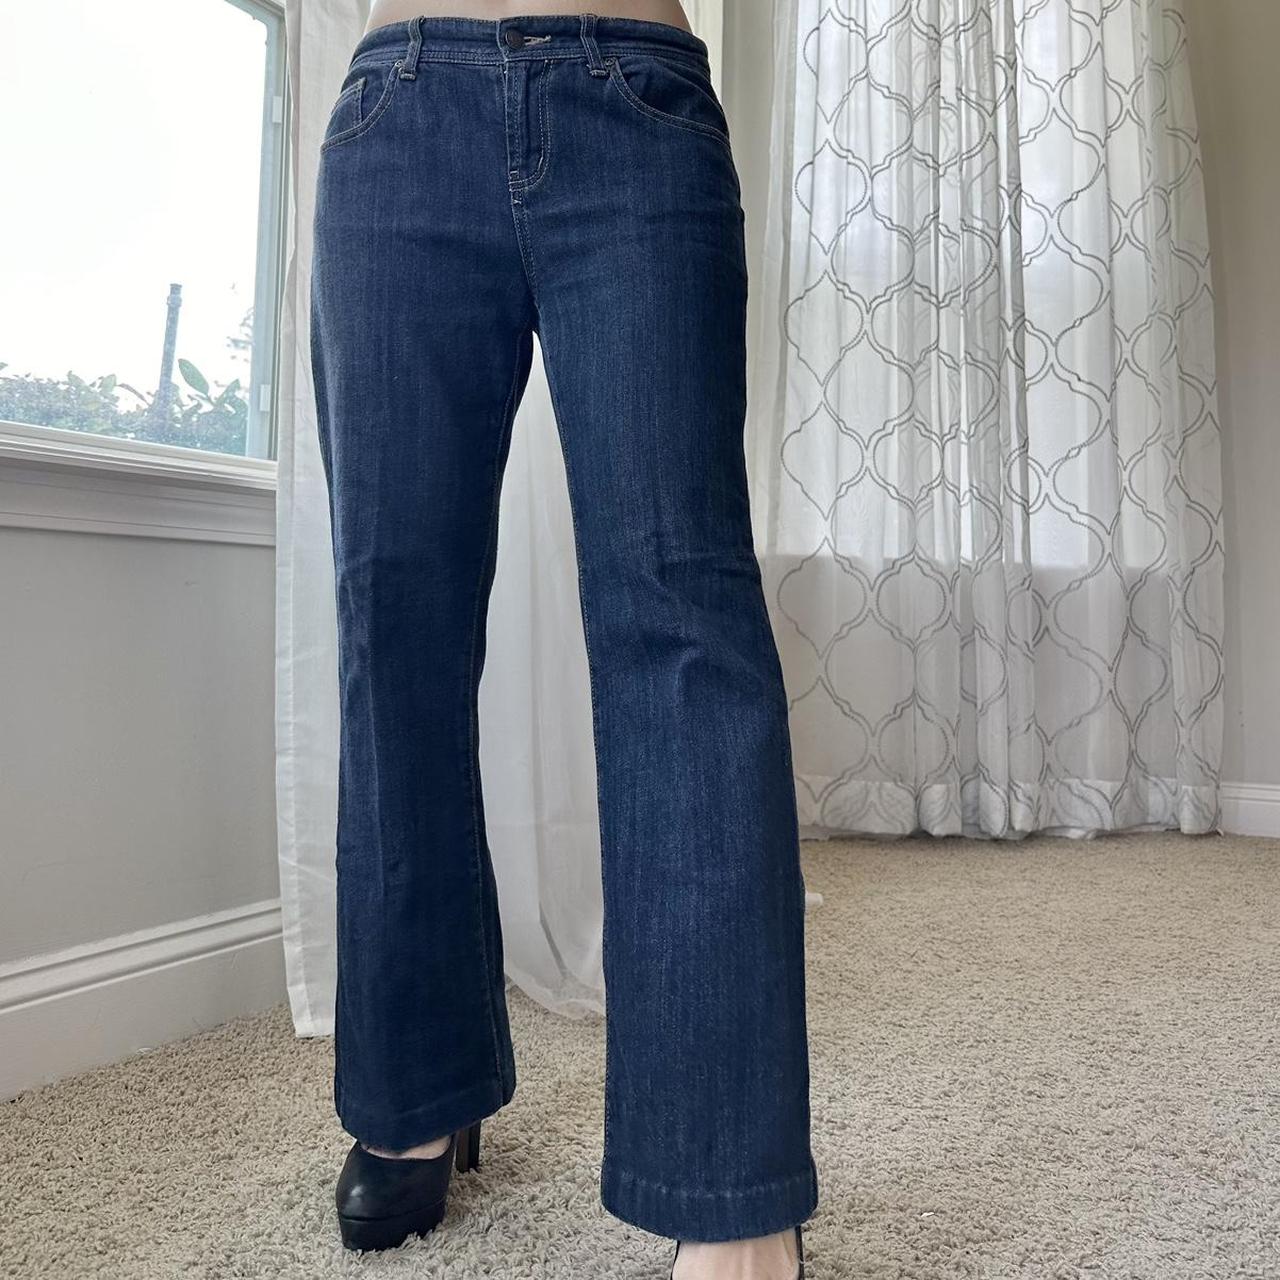 Nicole Miller Women's Navy and Blue Jeans